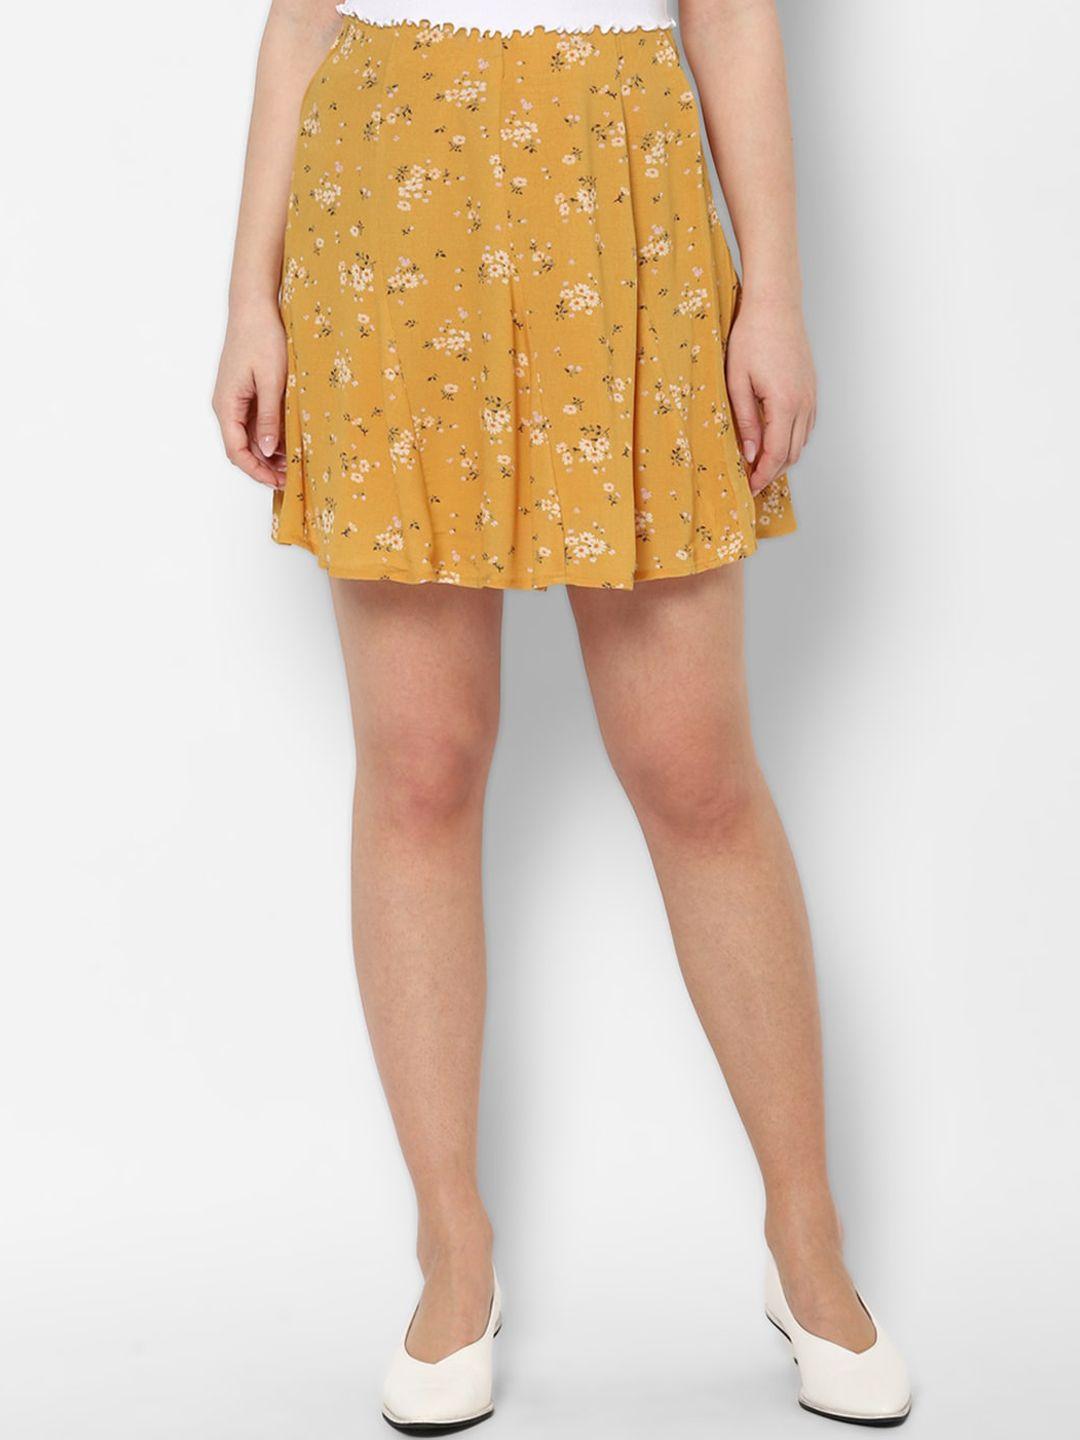 american-eagle-outfitters-women-yellow-floral-print-skirt